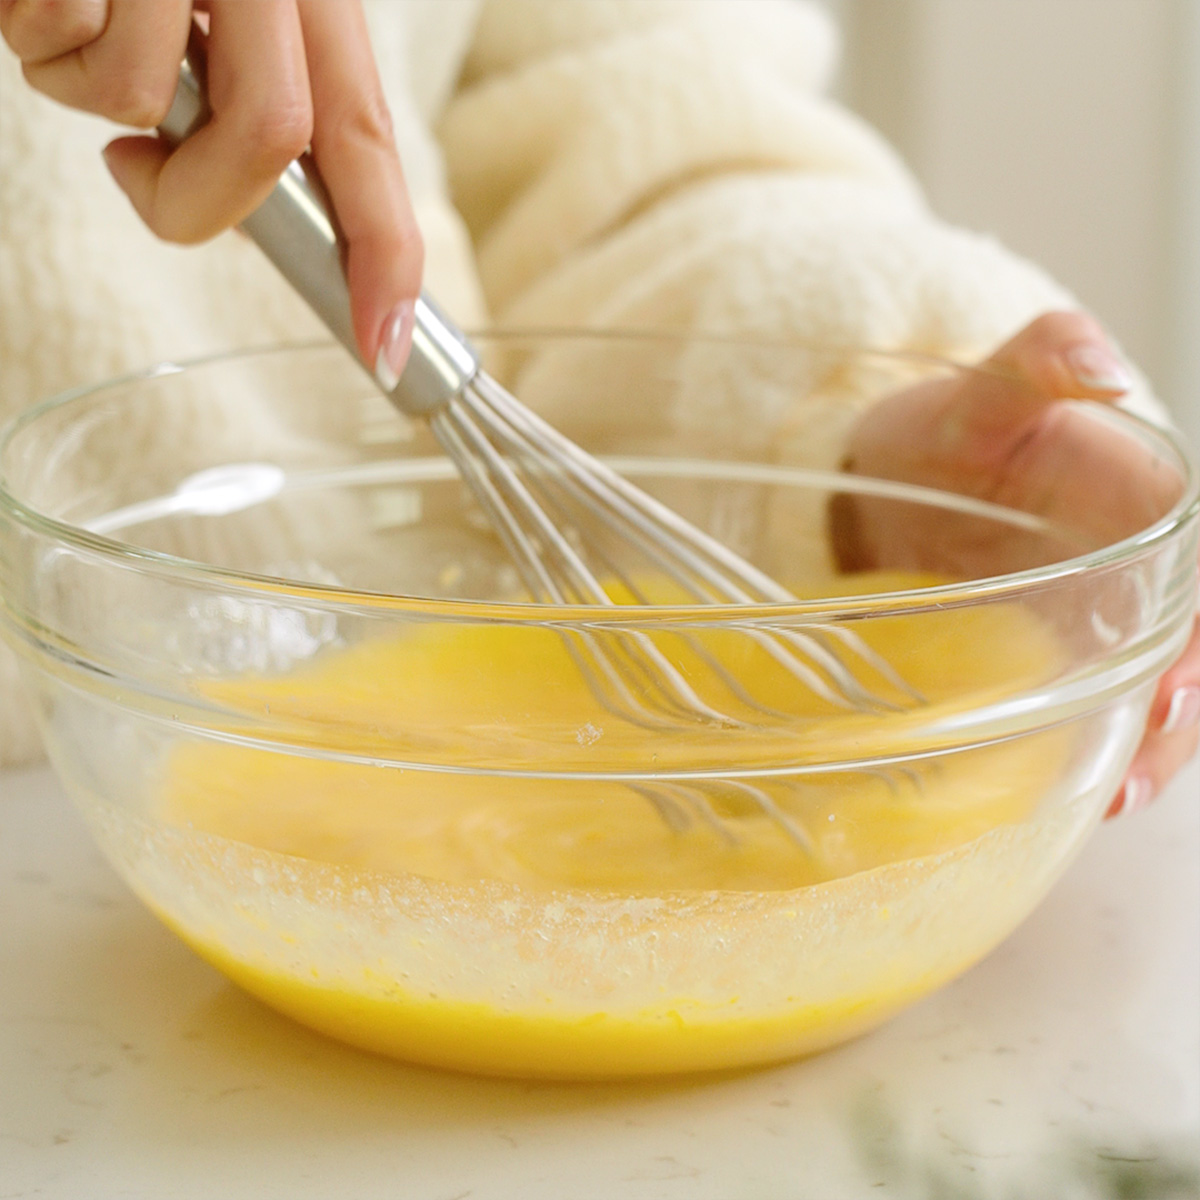 Mixing together all of the wet ingredients in a mixing bowl with a whisk.